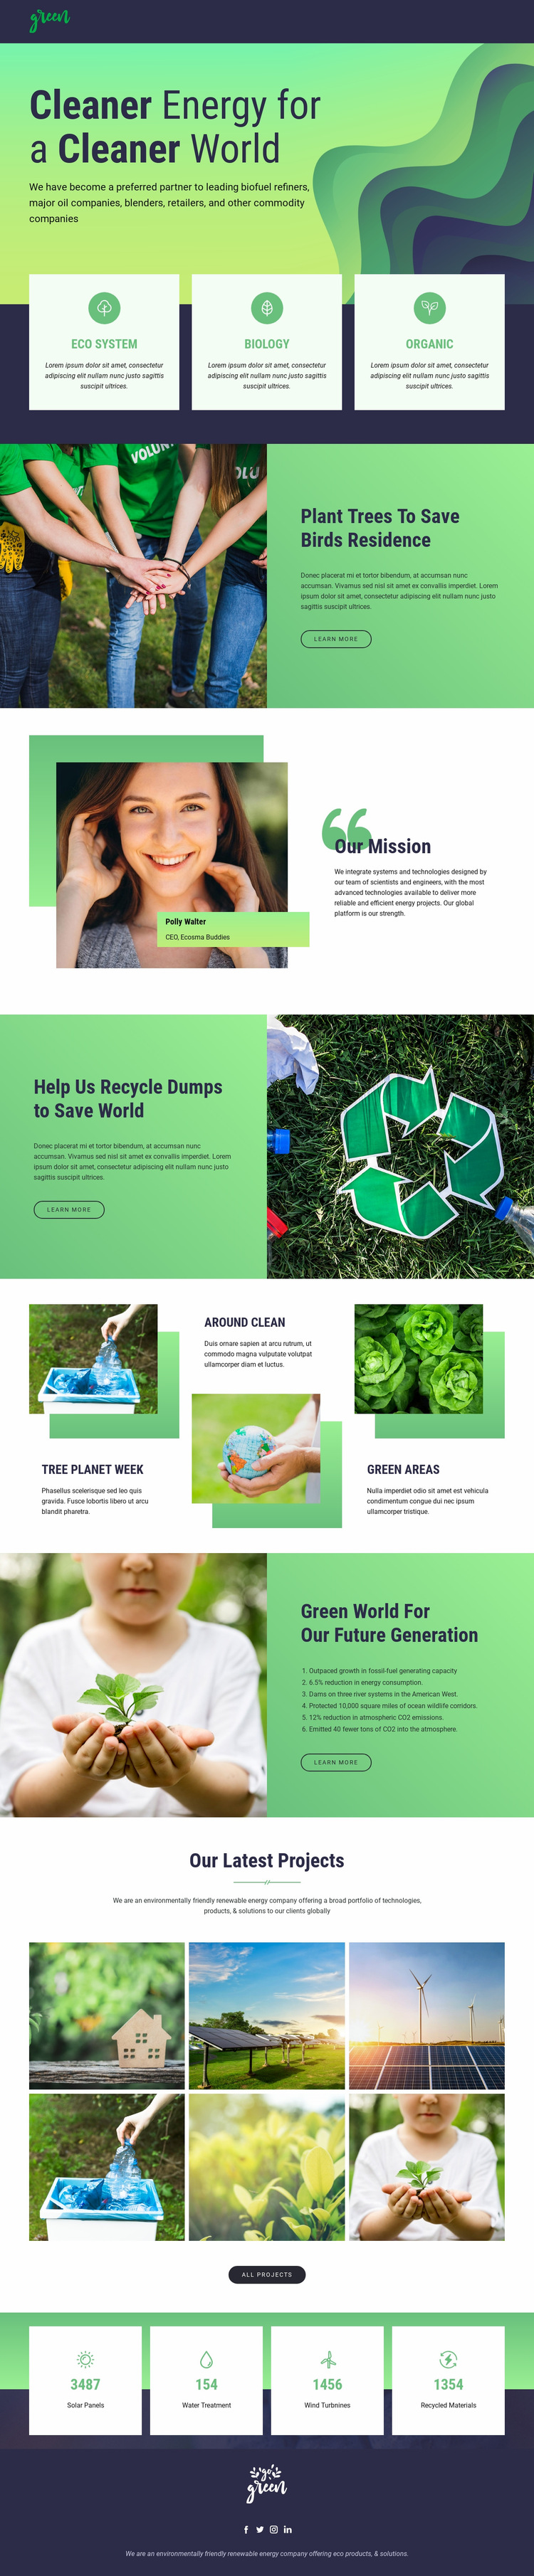 Clean energy to save nature Website Builder Templates